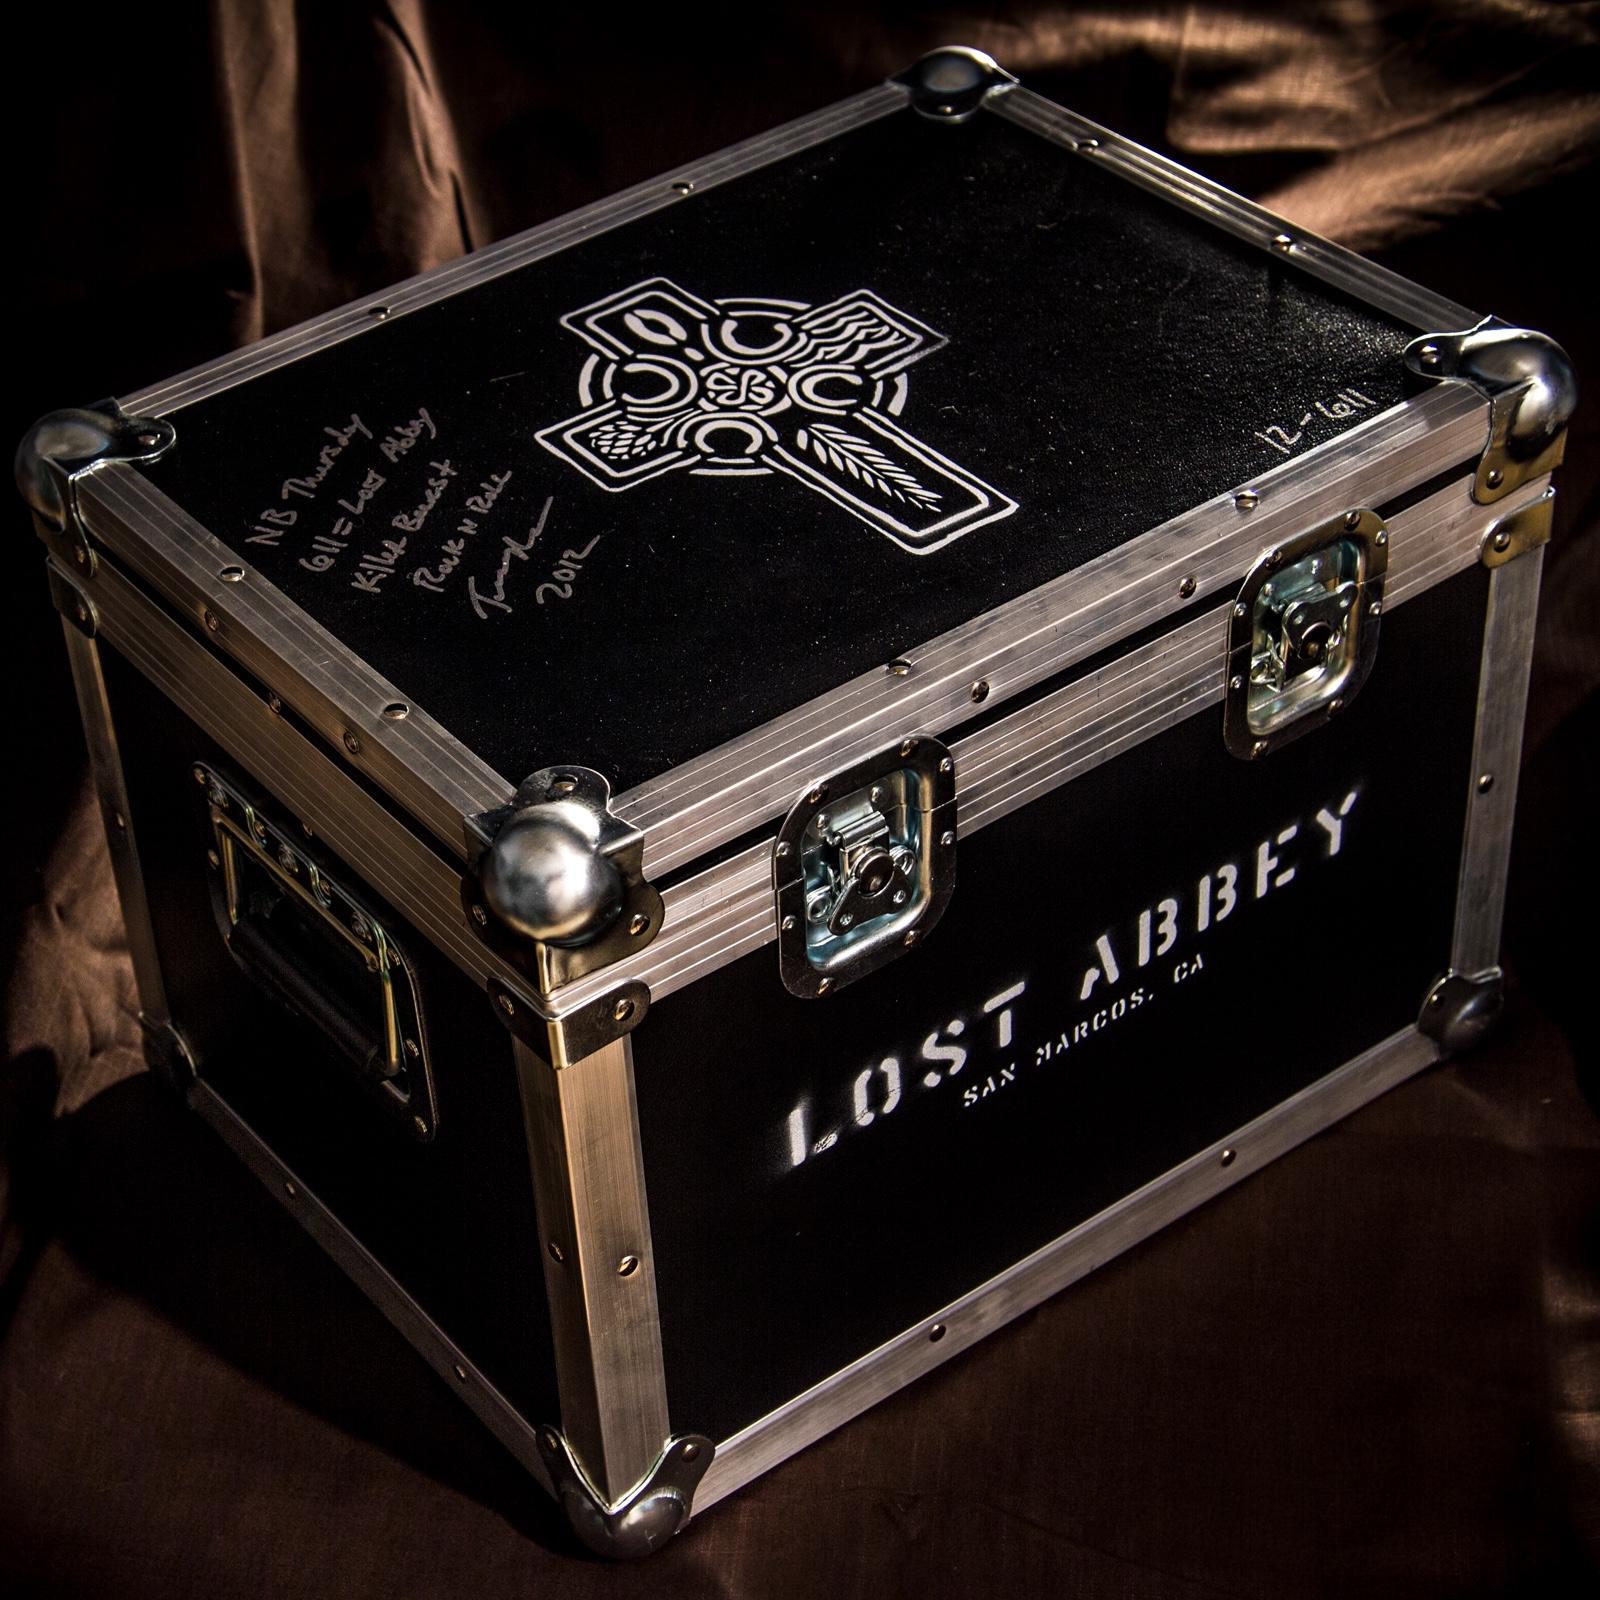 The Lost Abbey Ultimate Box Set